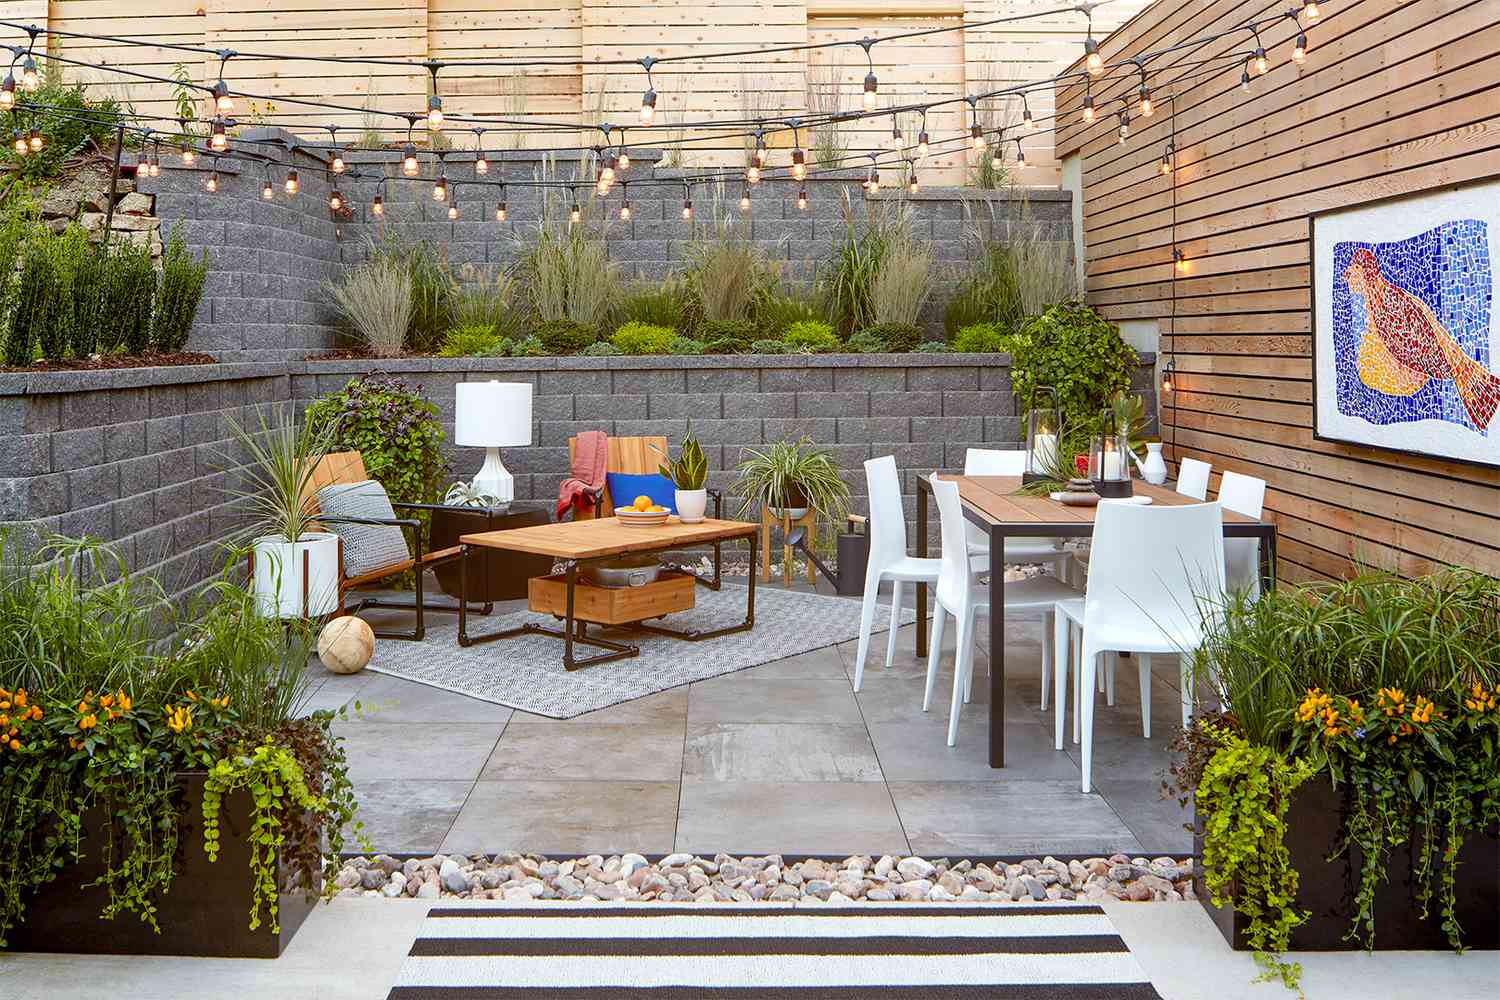 How To Install Poles To Hang Outdoor String Lights In Your Backyard Better Homes Gardens